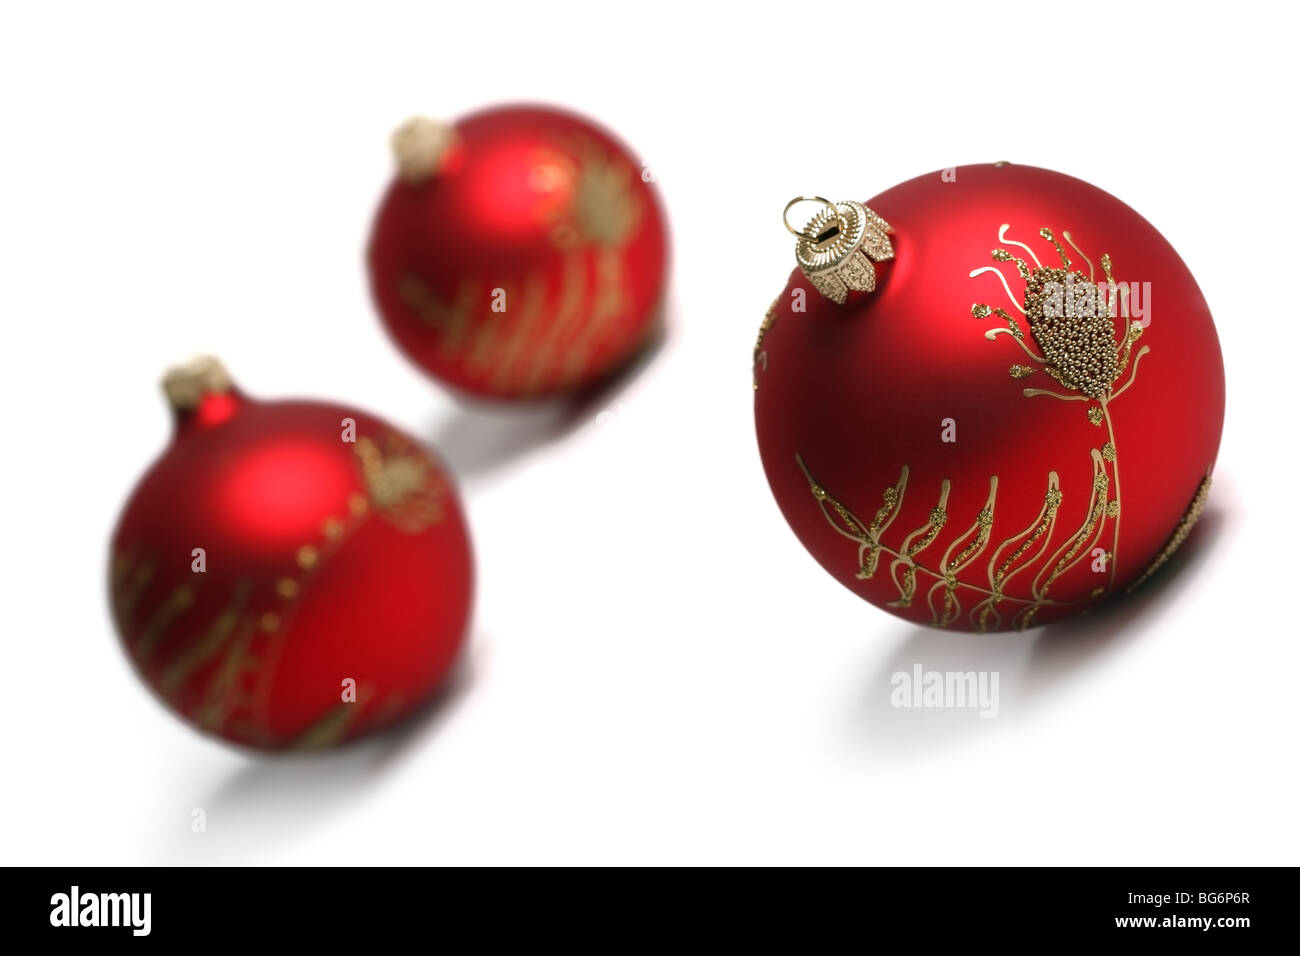 Three Red Christmas Balls Isolated On White Background. Tilt view, shallow DOF. Stock Photo